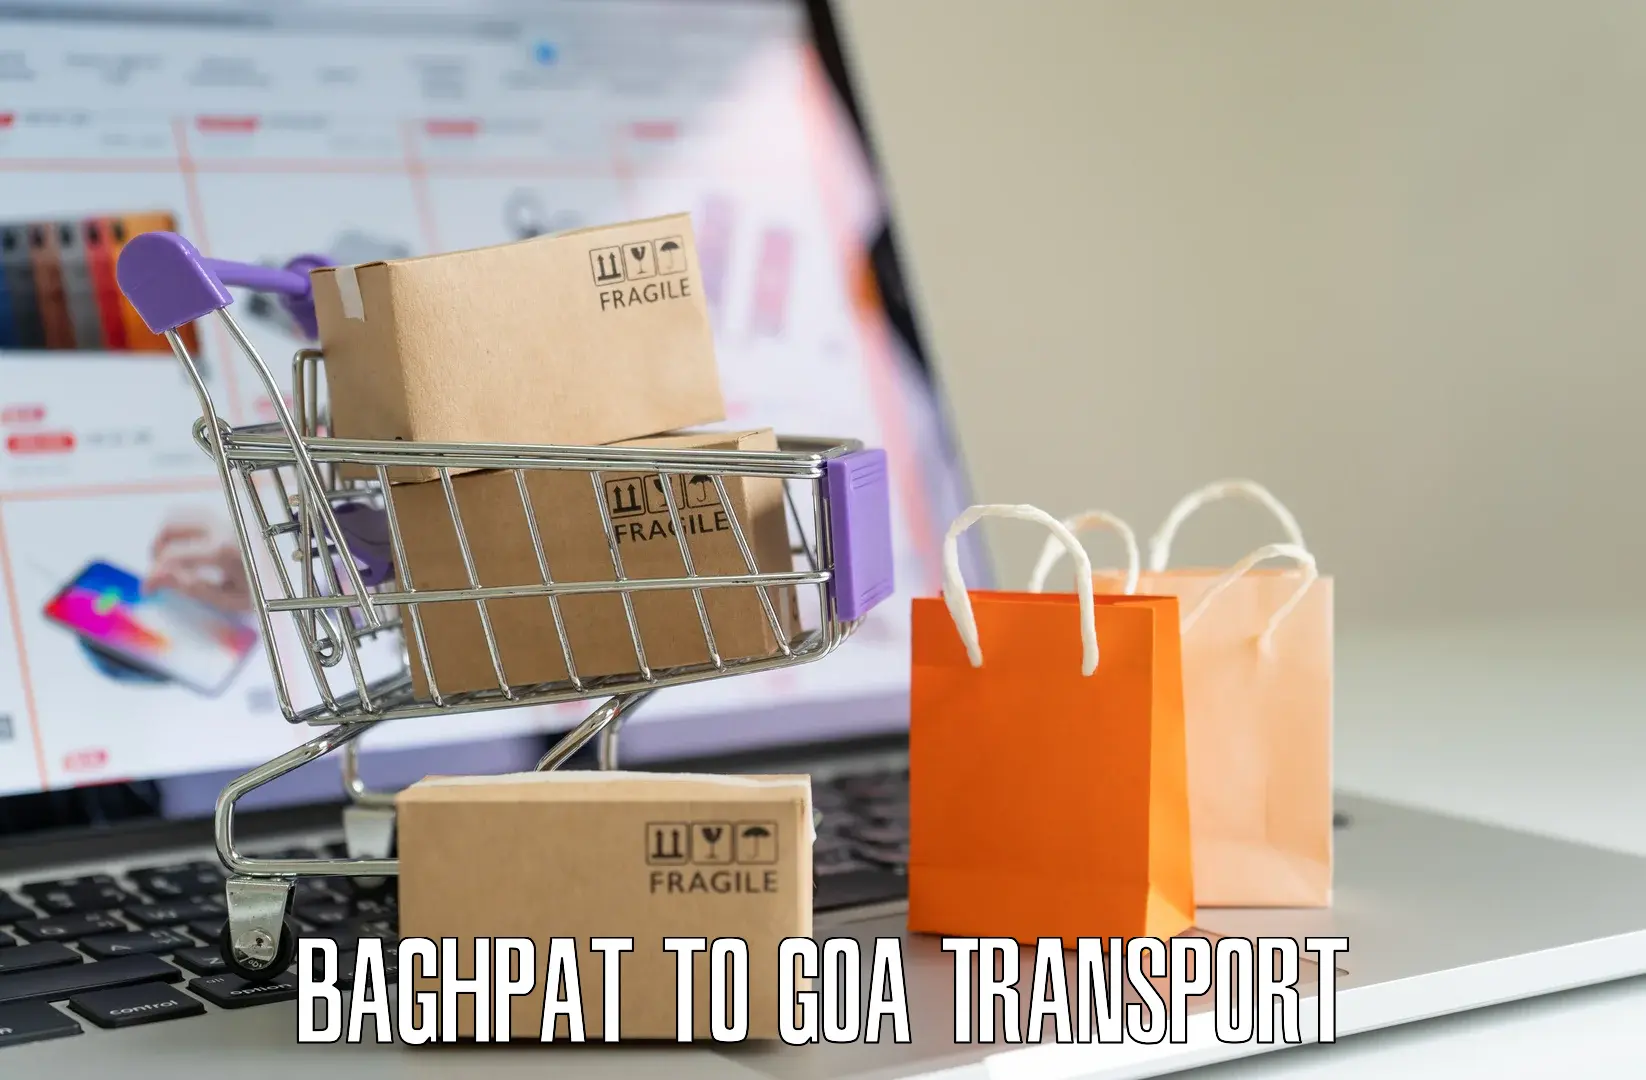 Commercial transport service Baghpat to Margao